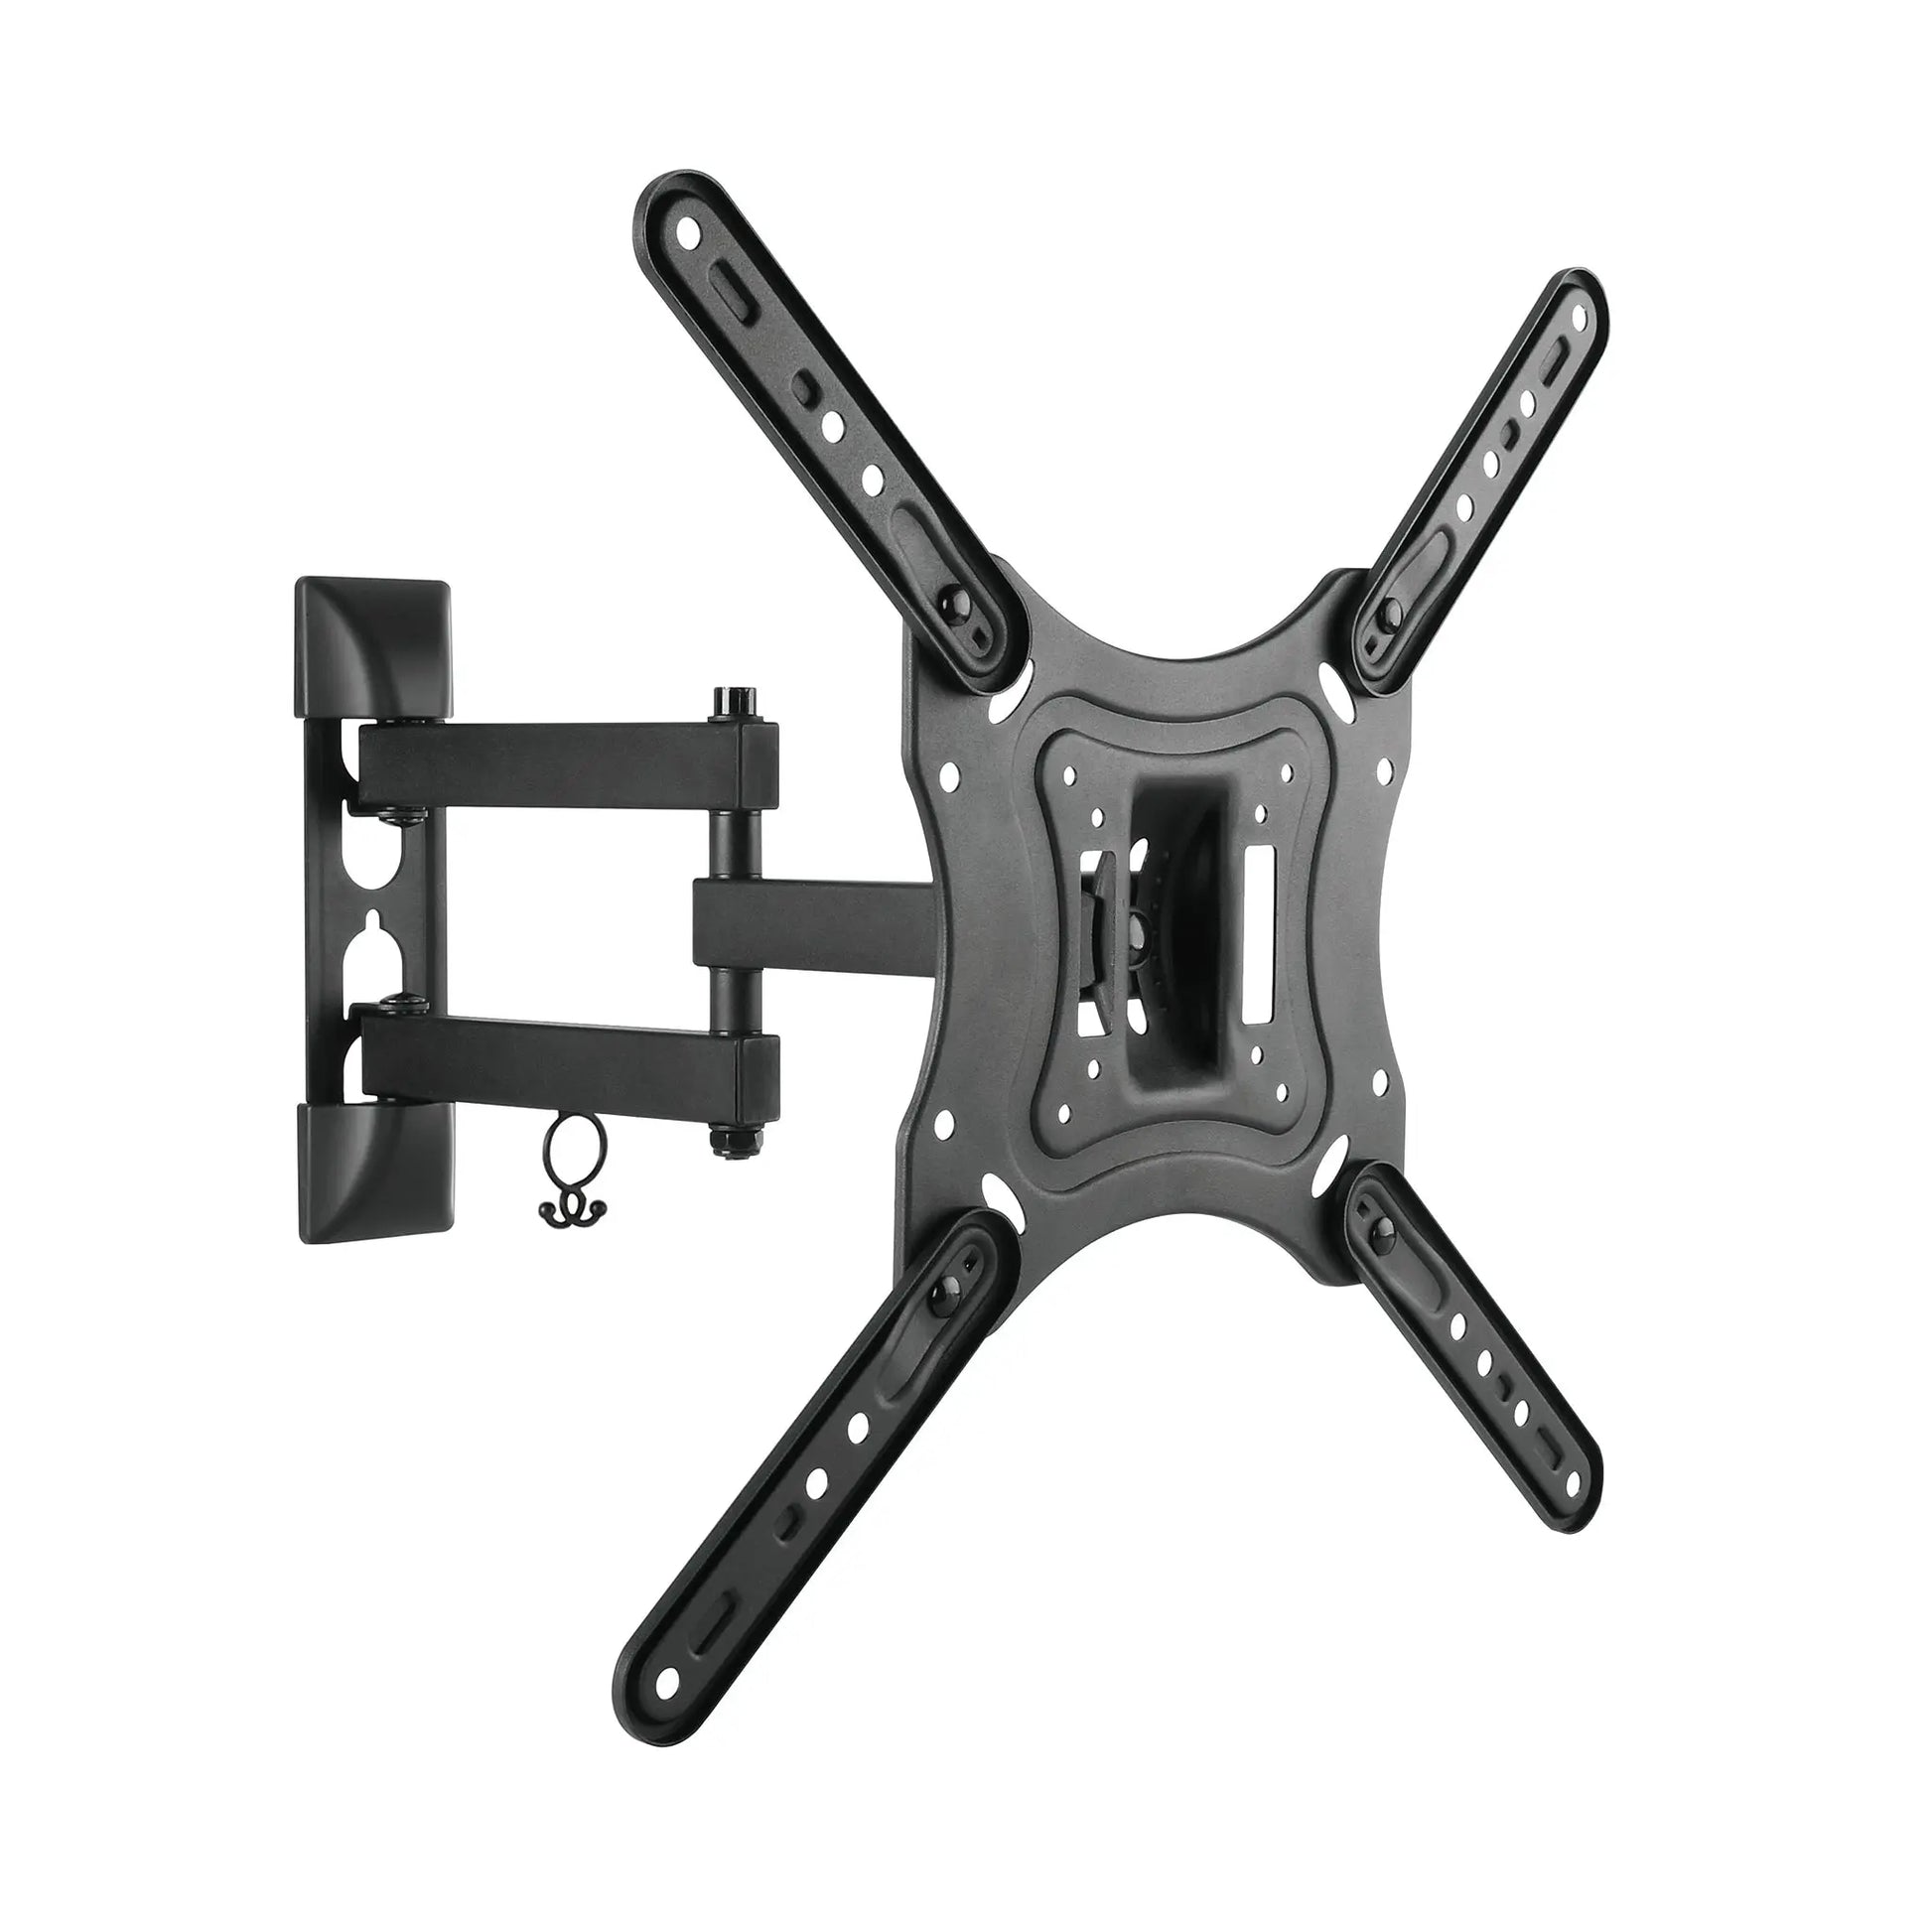 Full Motion / Articulating TV Wall Mount For 32" to 55" TVs up to 66lbs (MA4402-E) freeshipping - One Products